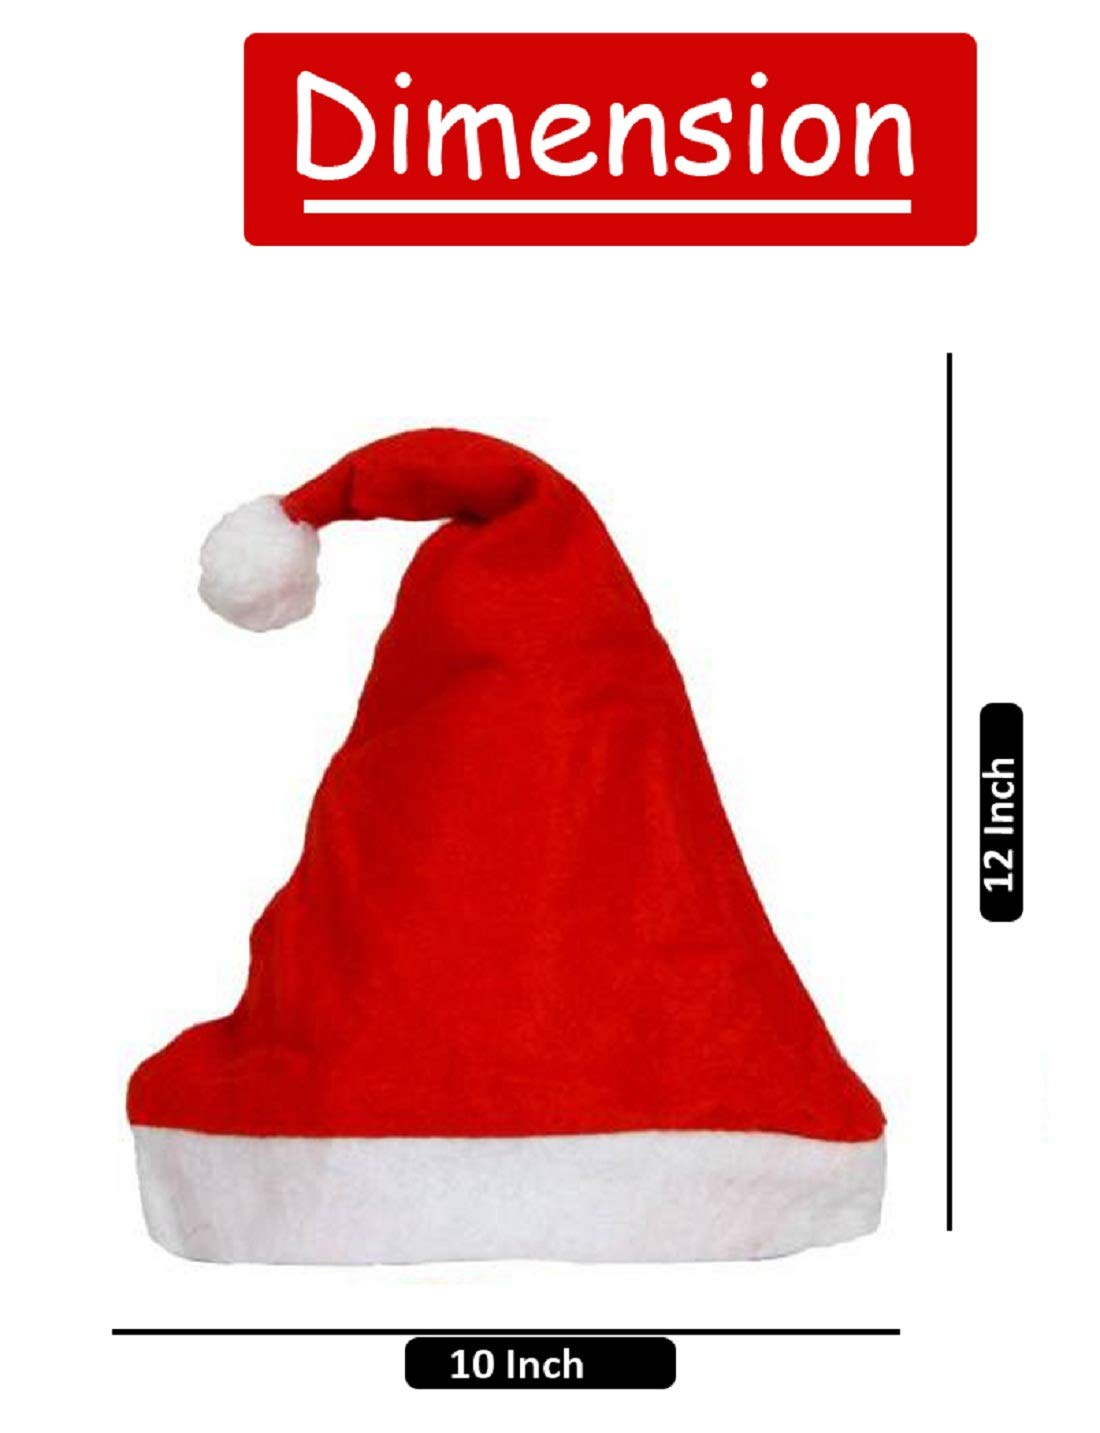 eCraftIndia Red and White Merry Christmas Hats, Santa Claus Caps for kids and Adults - Free Size XMAS Caps, Santa Claus Hats for Christmas, New Year, Festive Holiday Party (Set of 3) 6